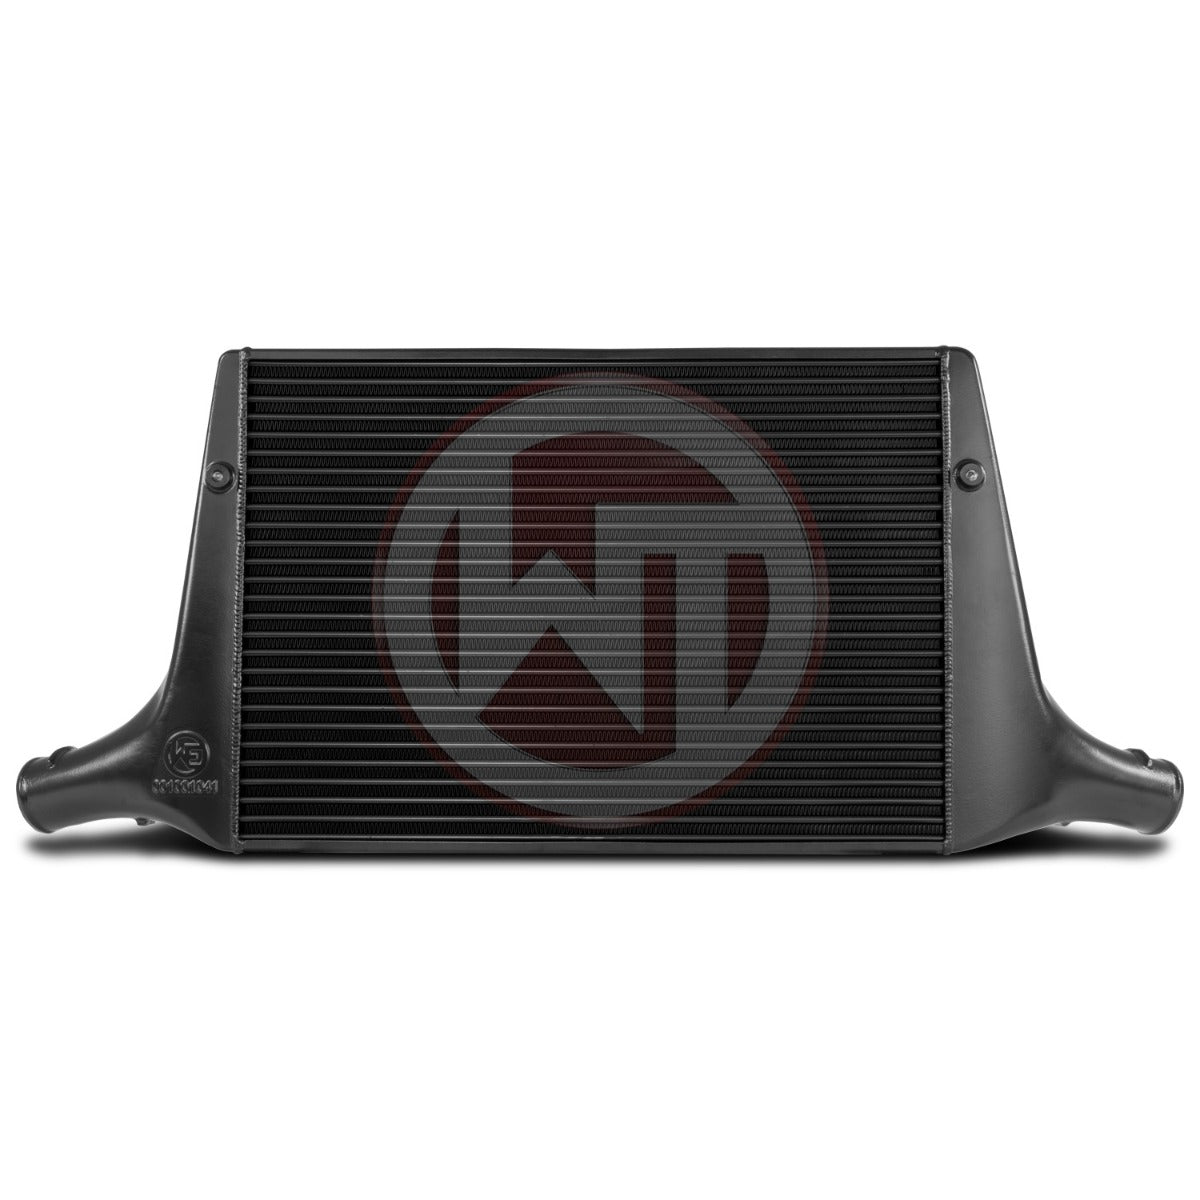 Wagner Tuning Audi A4 & A5 B8.5 2.0 TFSI Competition Intercooler Kit